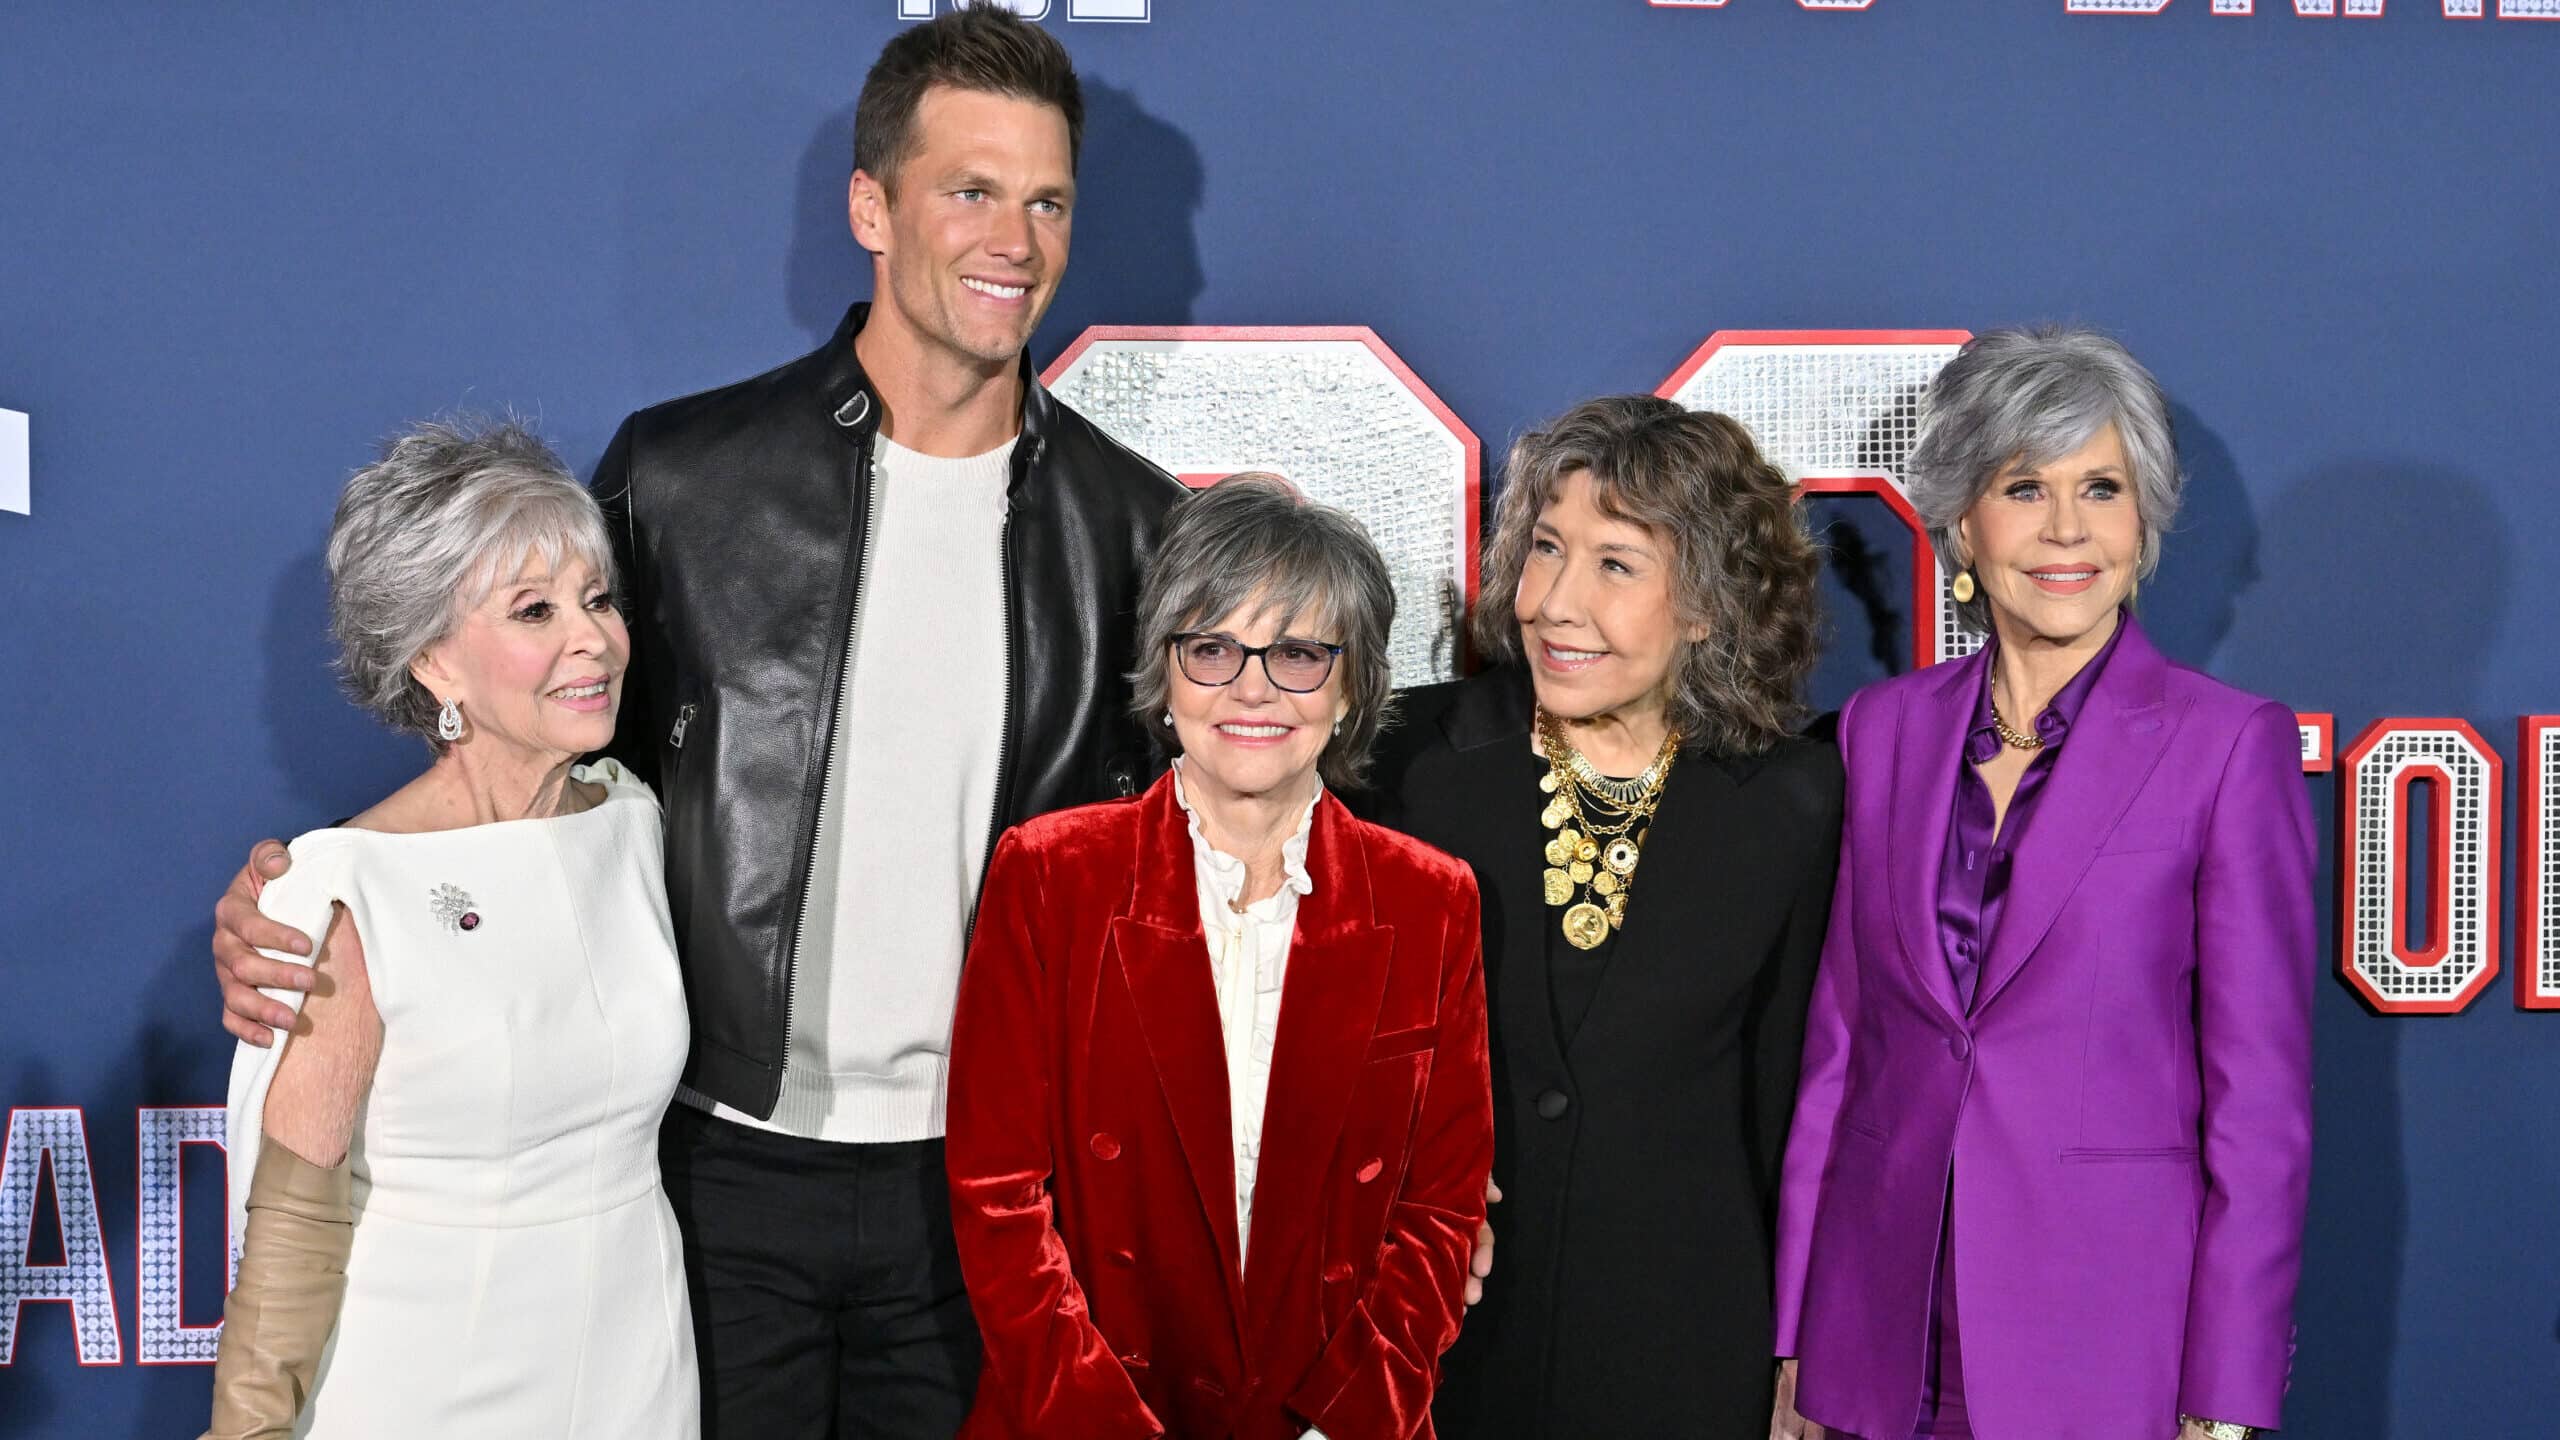 Rita Moreno, Tom Brady, Sally Field, Lily Tomlin and Jane Fonda attend the Los Angeles Premiere Screening of Paramount Pictures' "80 For Brady" at Regency Village Theatre on January 31, 2023 in Los Angeles, California.